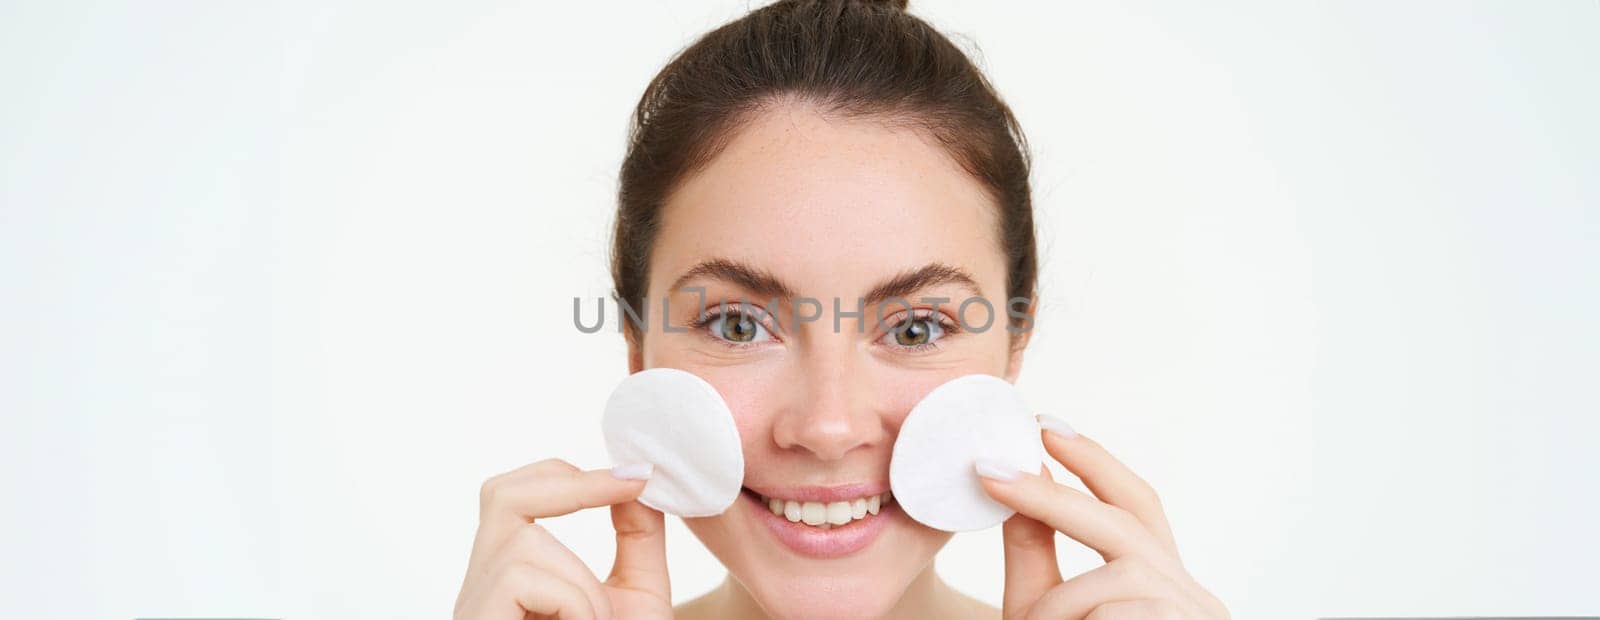 Close-up portrait of young woman washing her face, takes off her makeup with cotton pads, using facial toner, skincare cleanser, standing over white background.